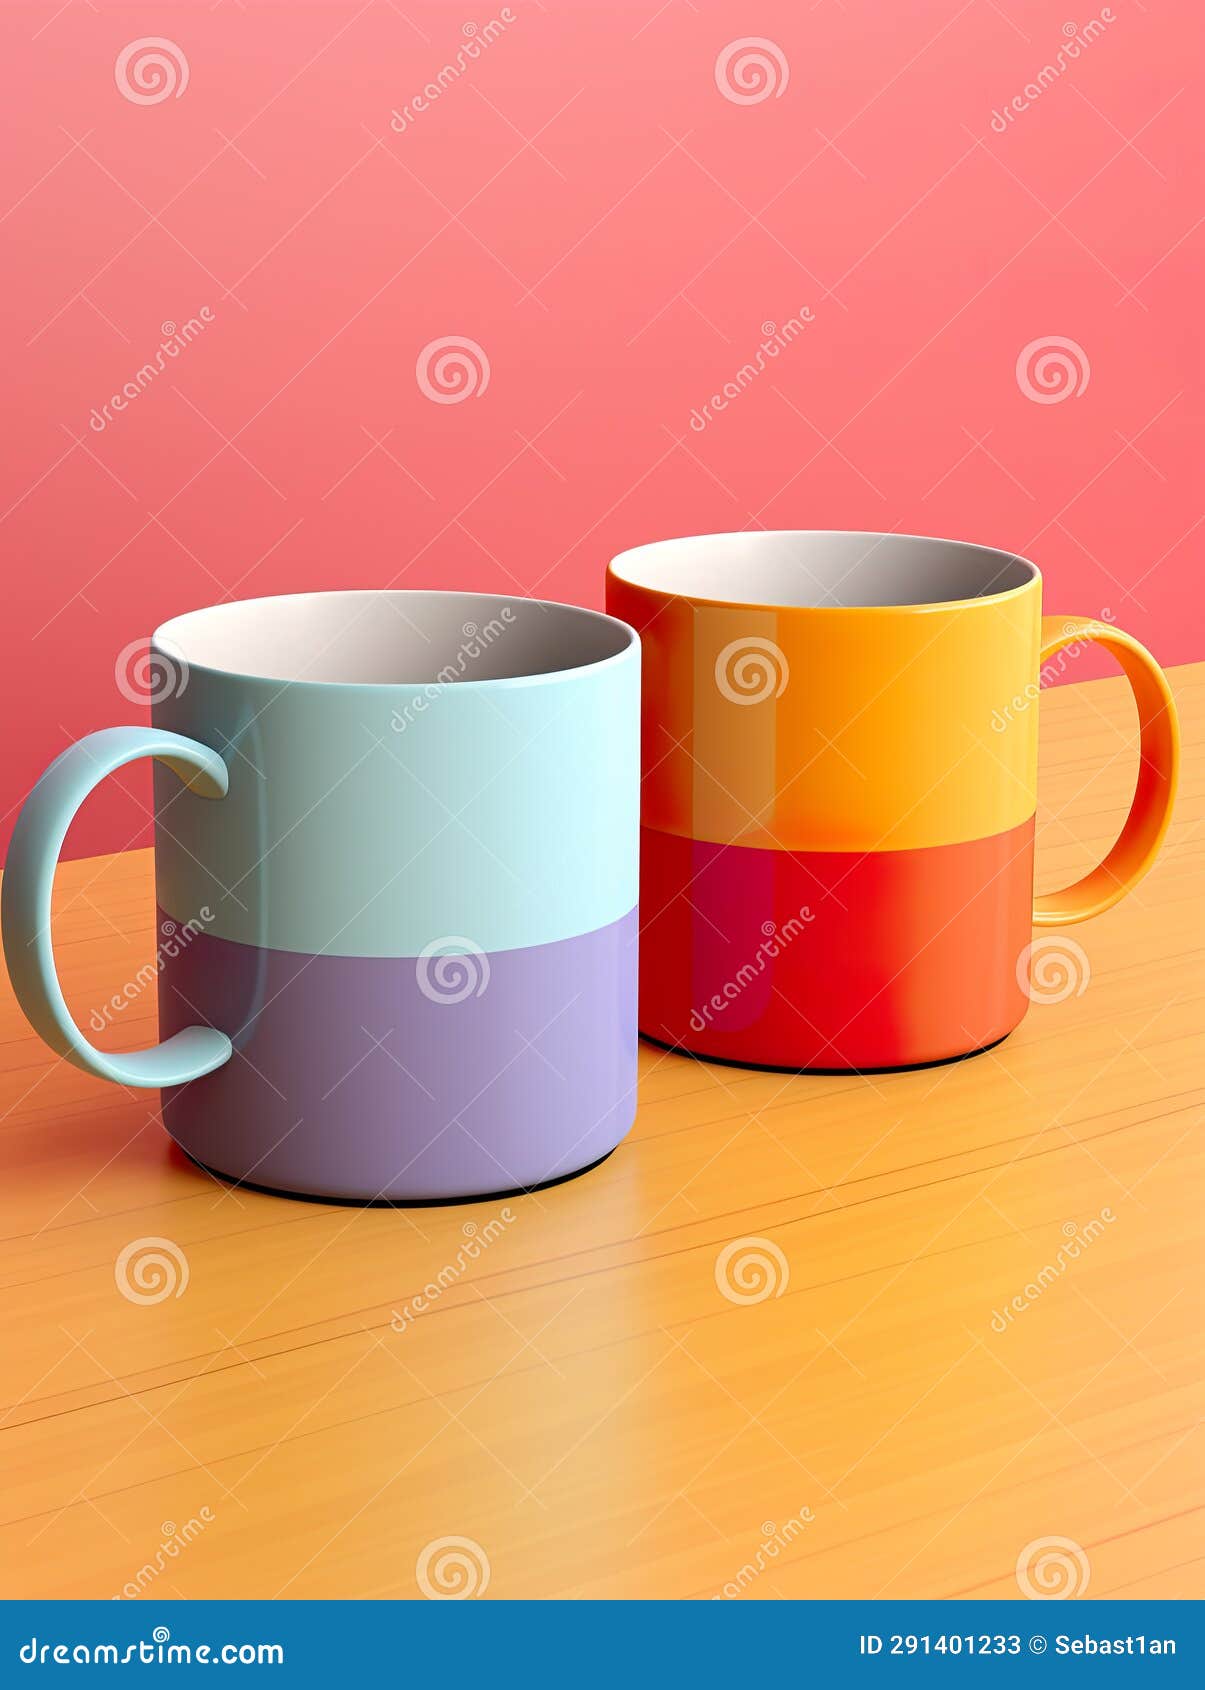 a minimalist studio shoot of two chic, complementary-colored mugs.